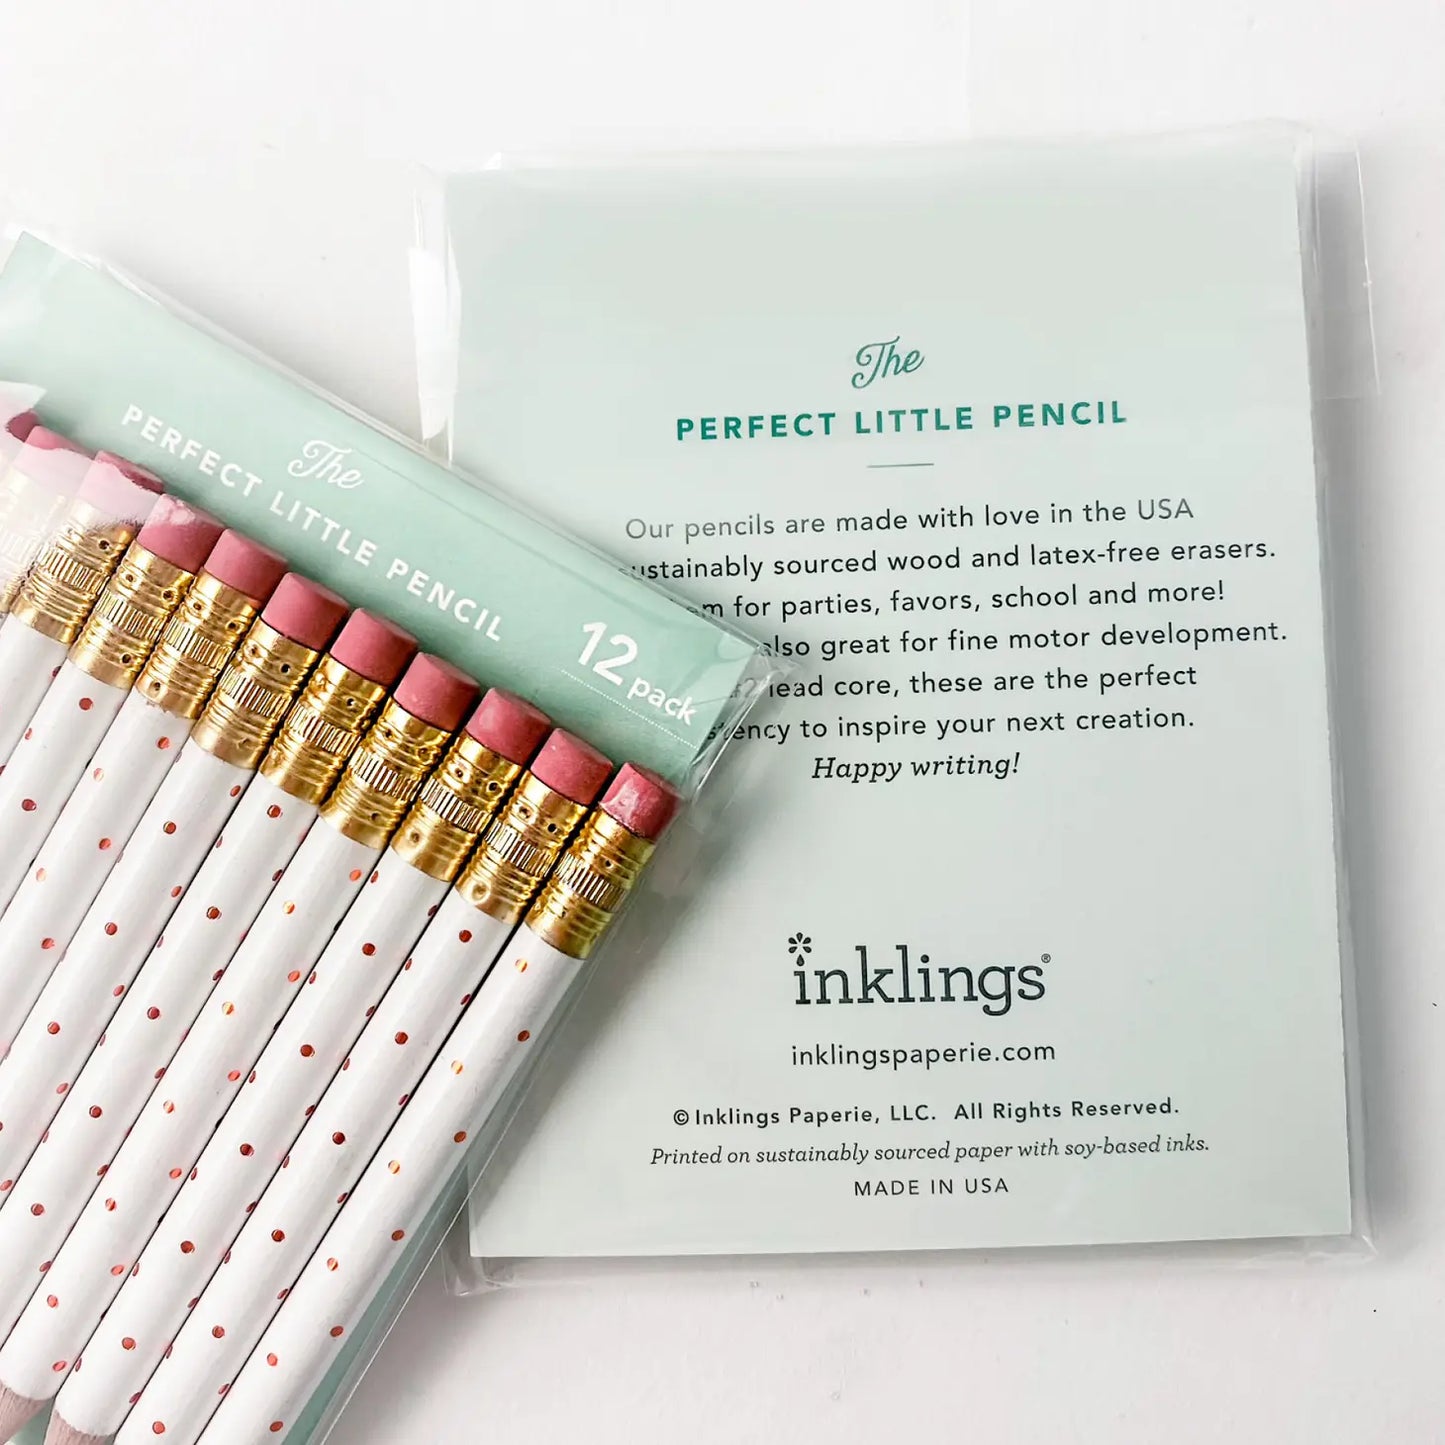 Front and back of white pencil pack. Front package shows white pencils with foil polka dots. Back wrapper gives a description of "The Perfect Little Pencil" and Inklings business information.